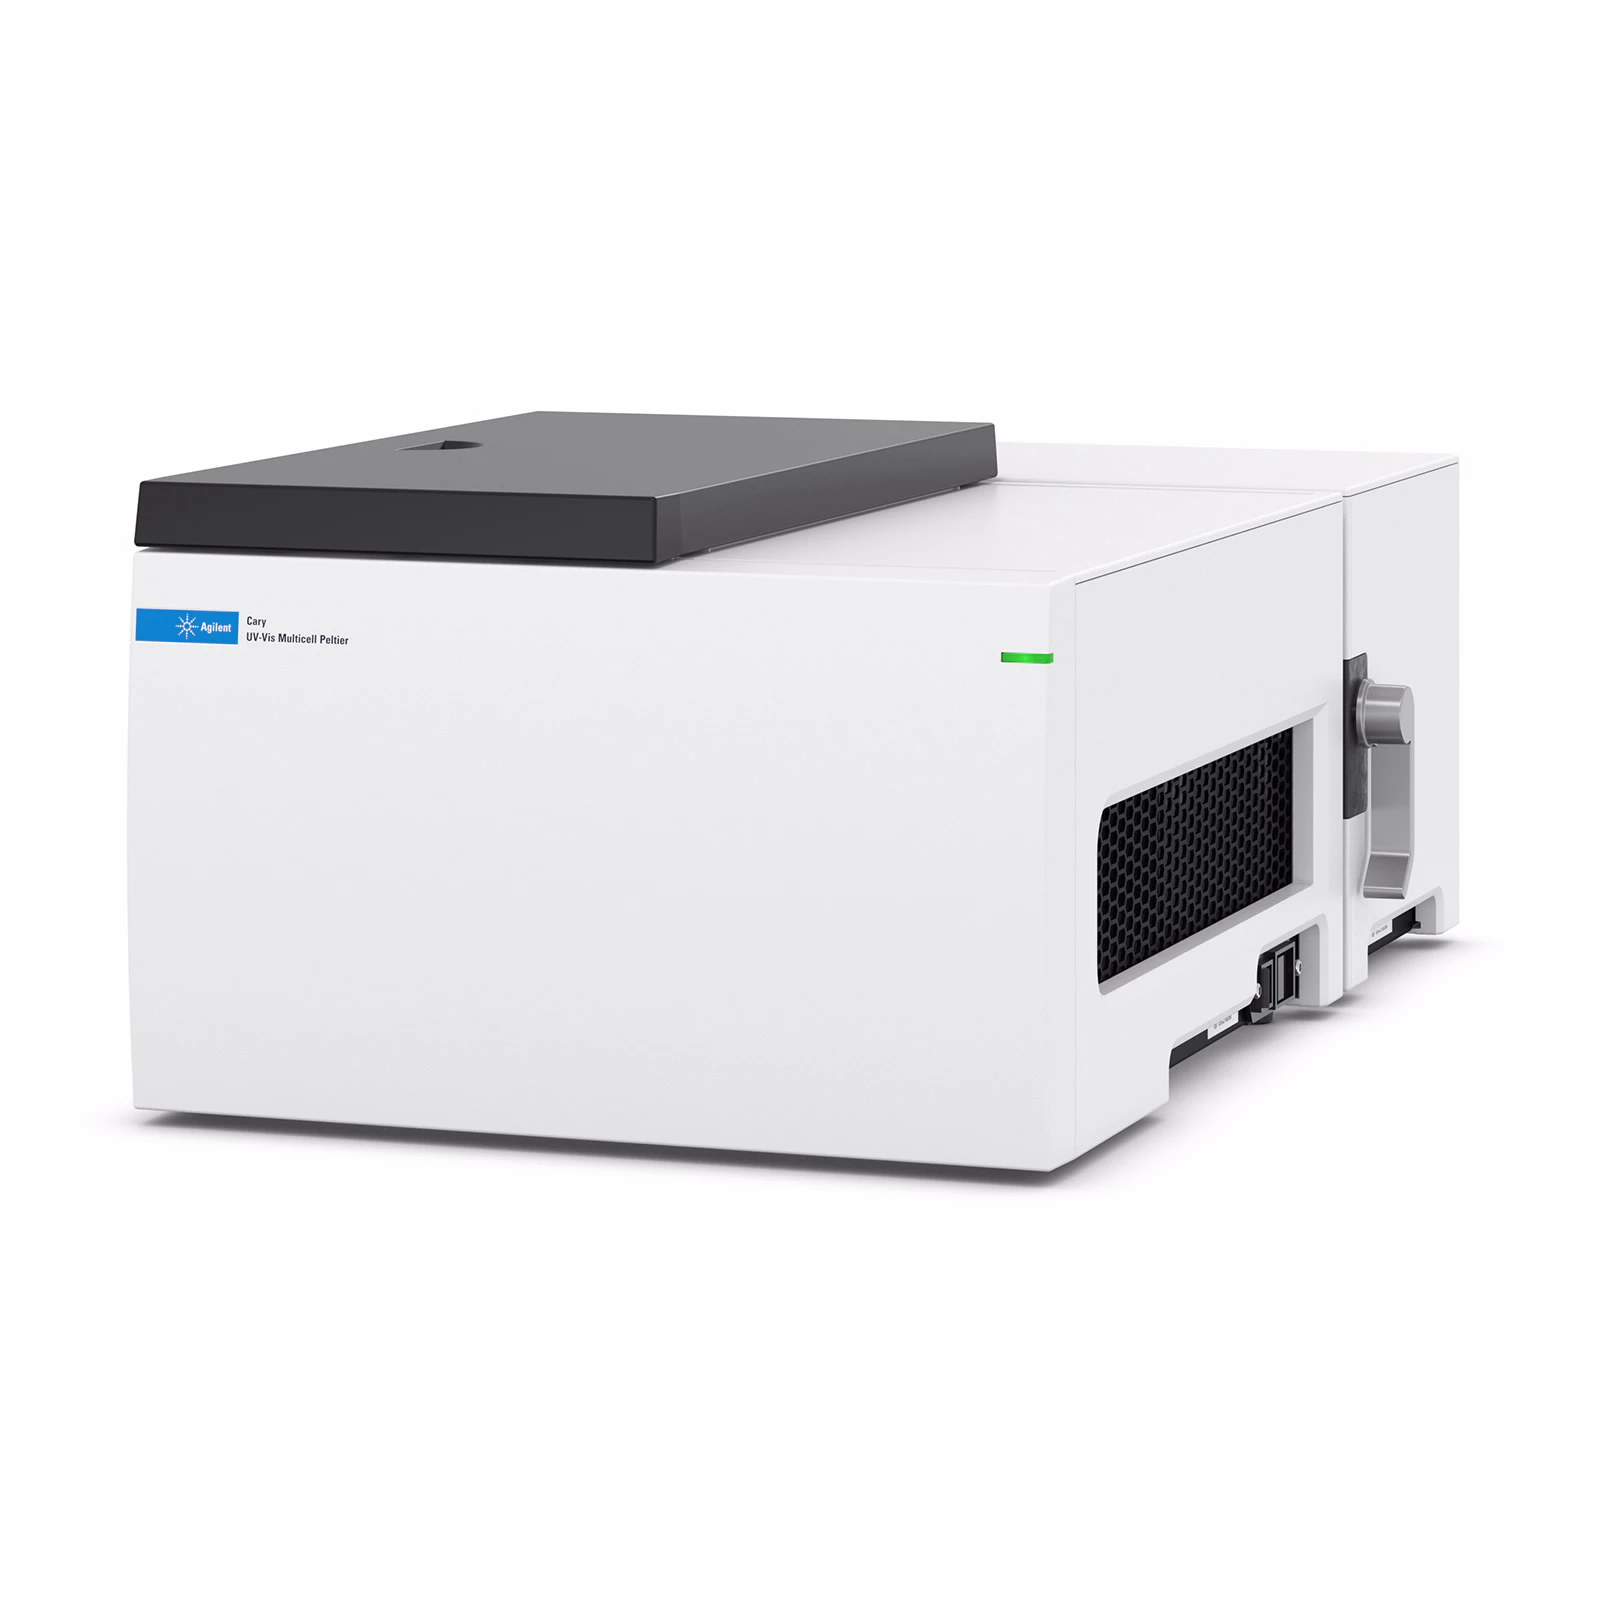 Agilent Certified Pre-Owned Cary 3500 Multicell UV-Vis Spectrophotometer